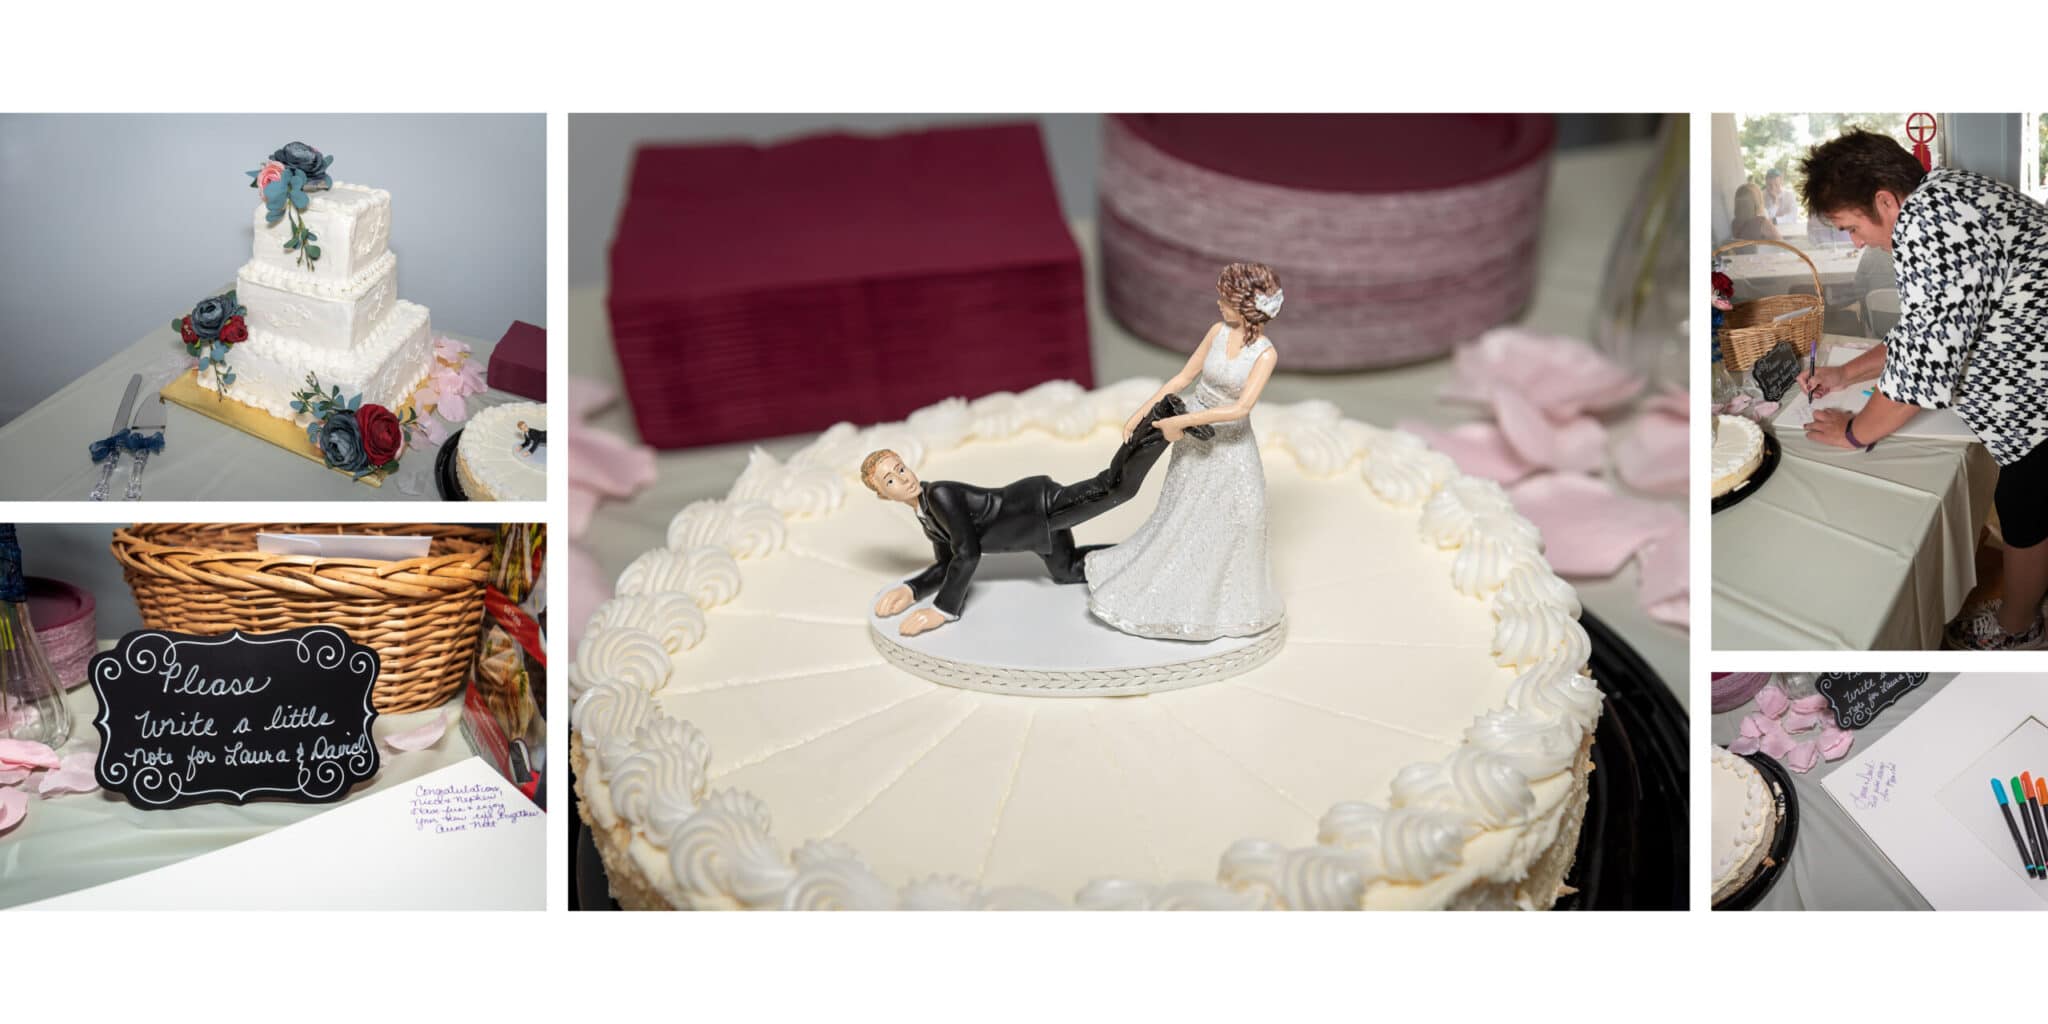 The wedding cake with humorous topper figurine of the bride pulling the leg of the groom.